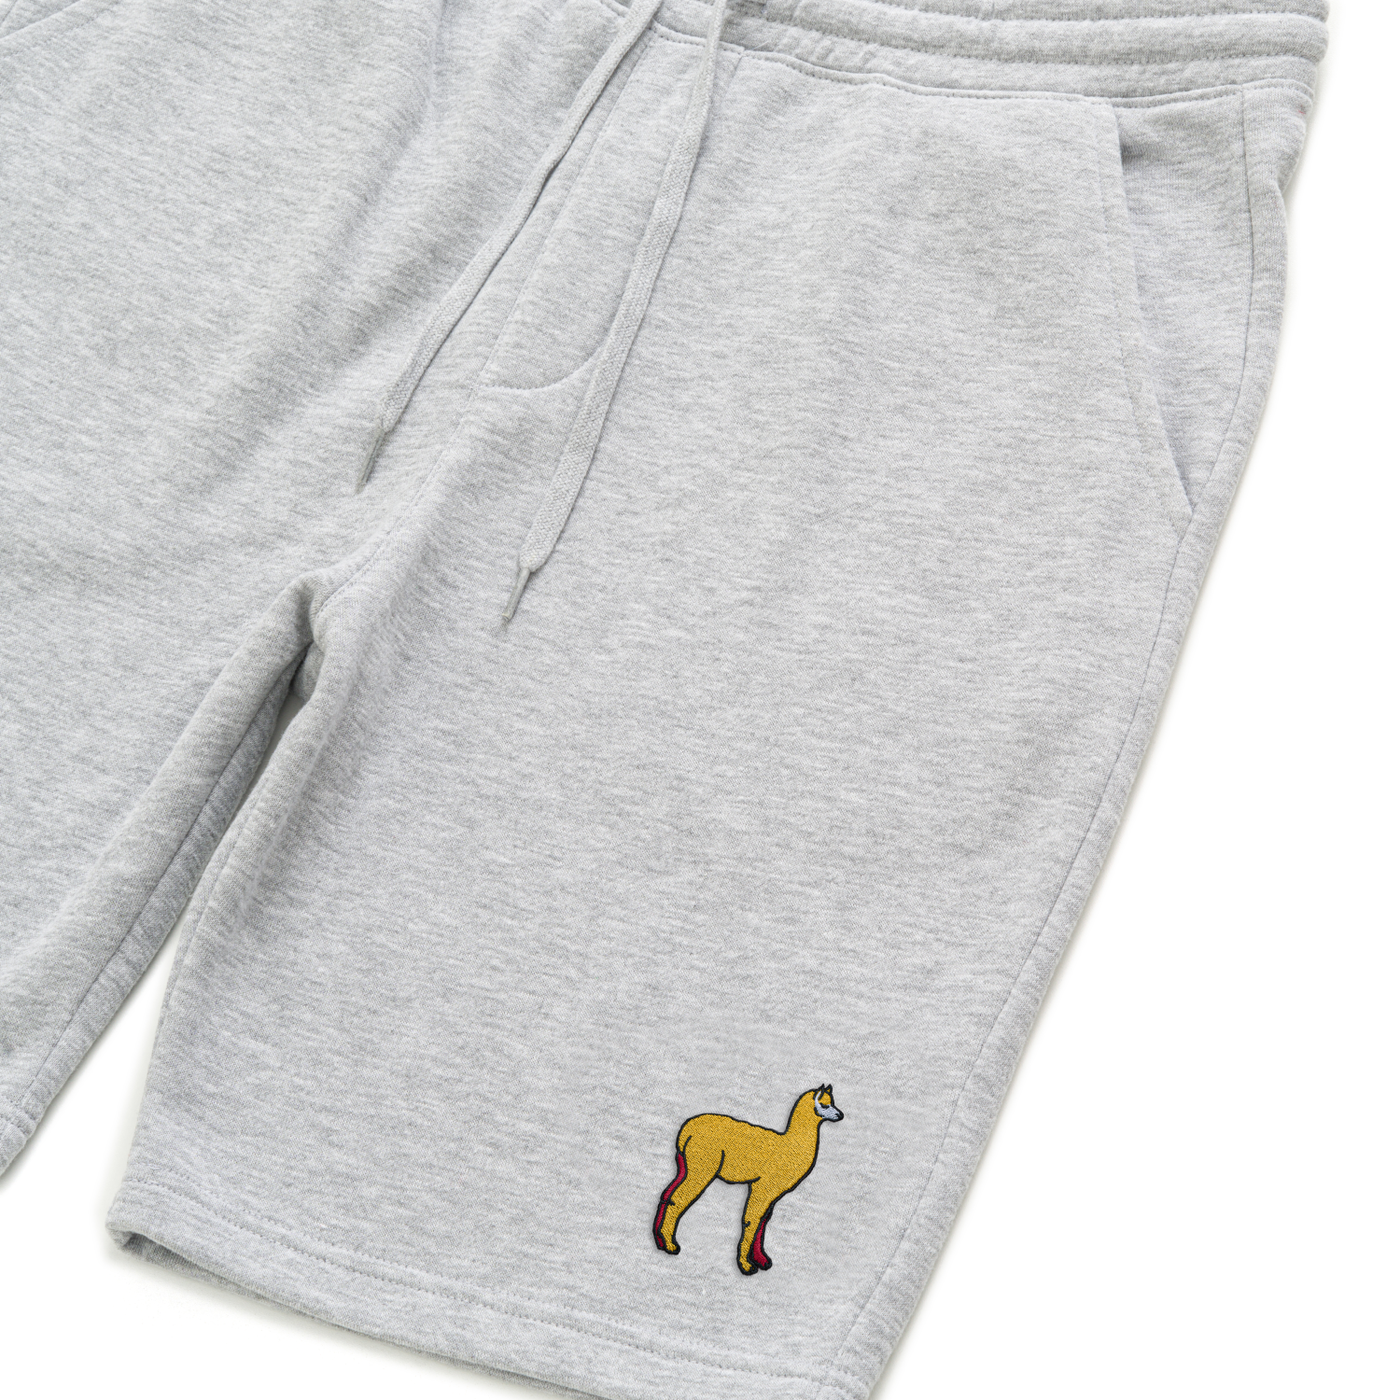 Bobby's Planet Men's Embroidered Alpaca Shorts from South American Amazon Animals Collection in Heather Grey Color#color_heather-grey